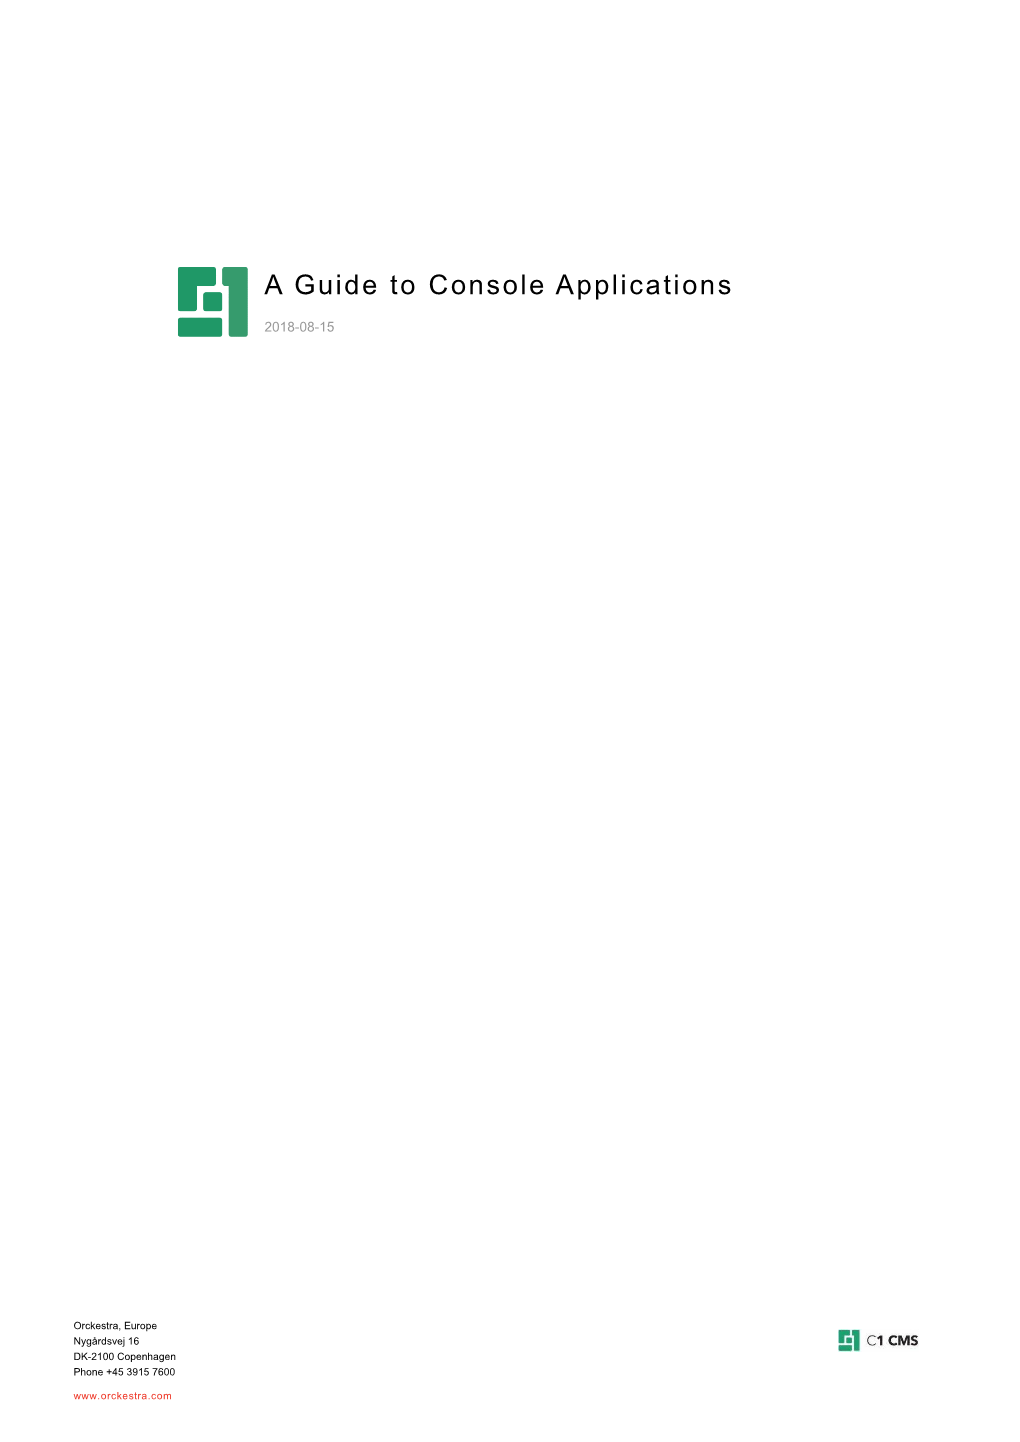 A Guide to Console Applications